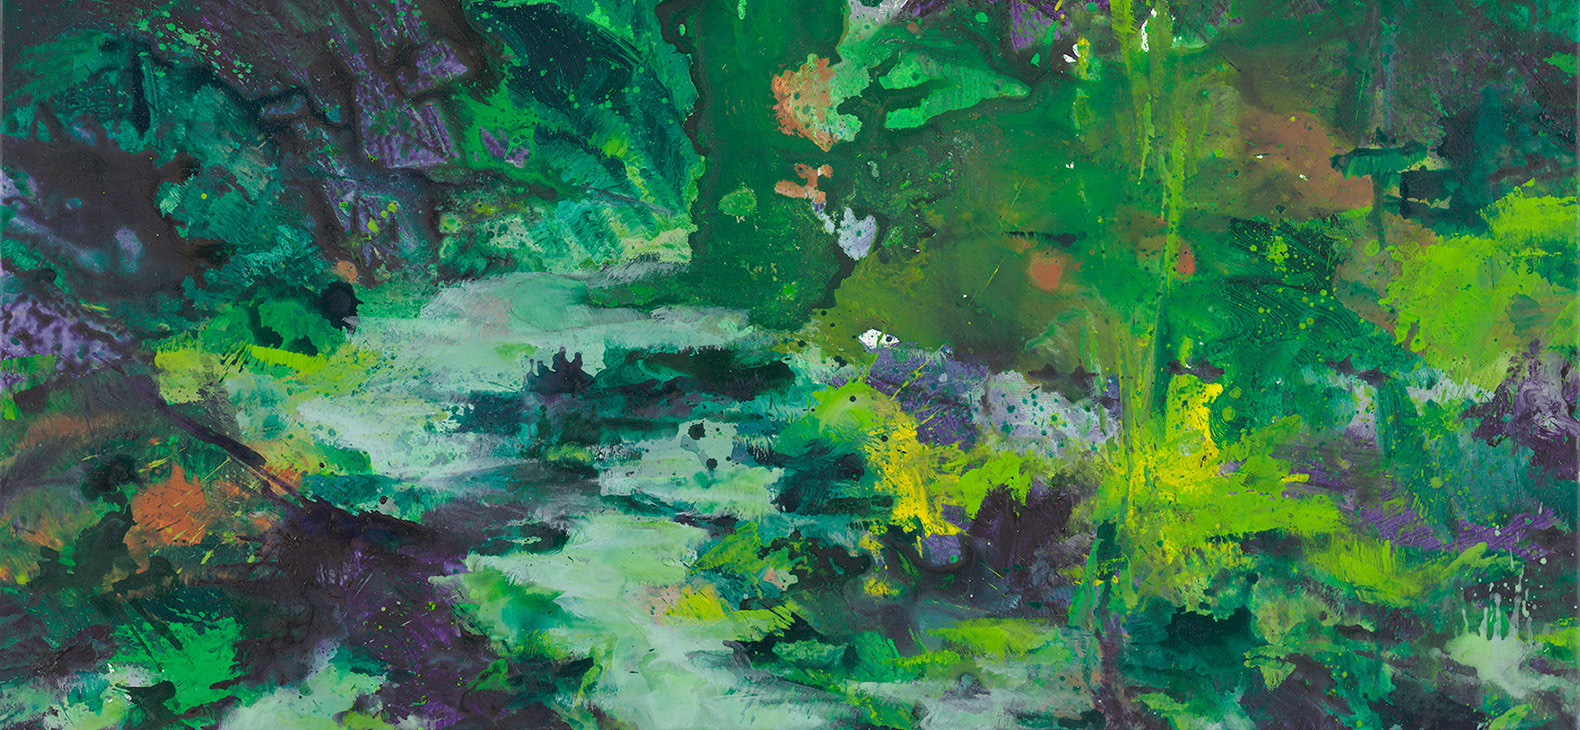 Detail of a painting by Bernd Zimmer; a watercourse and vegetal cover in an expressive manner of painting are visible; green is the dominant color